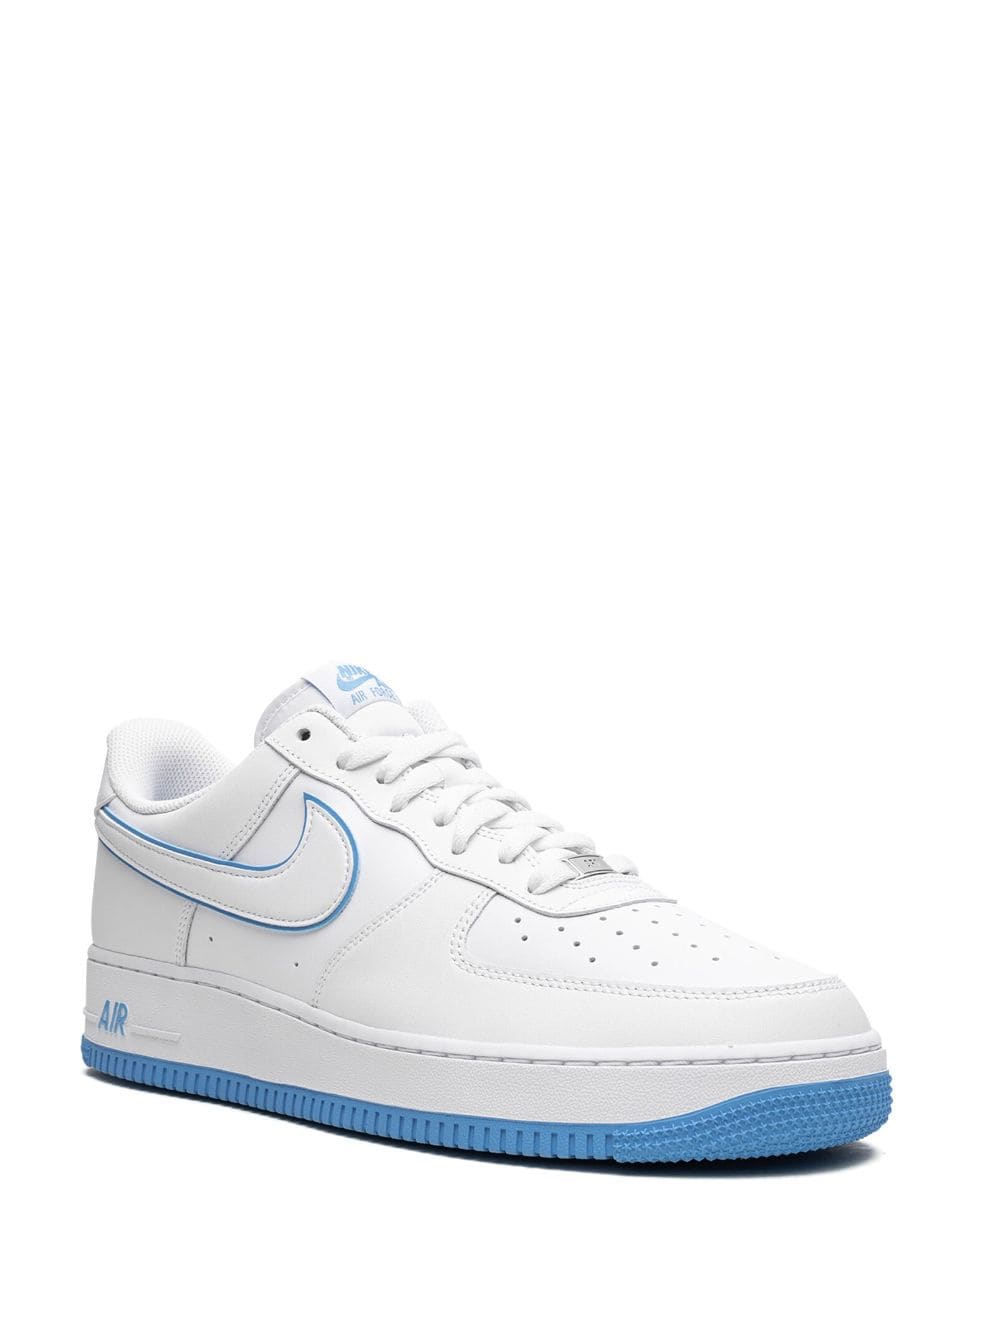 Air Force One WHITE UNC